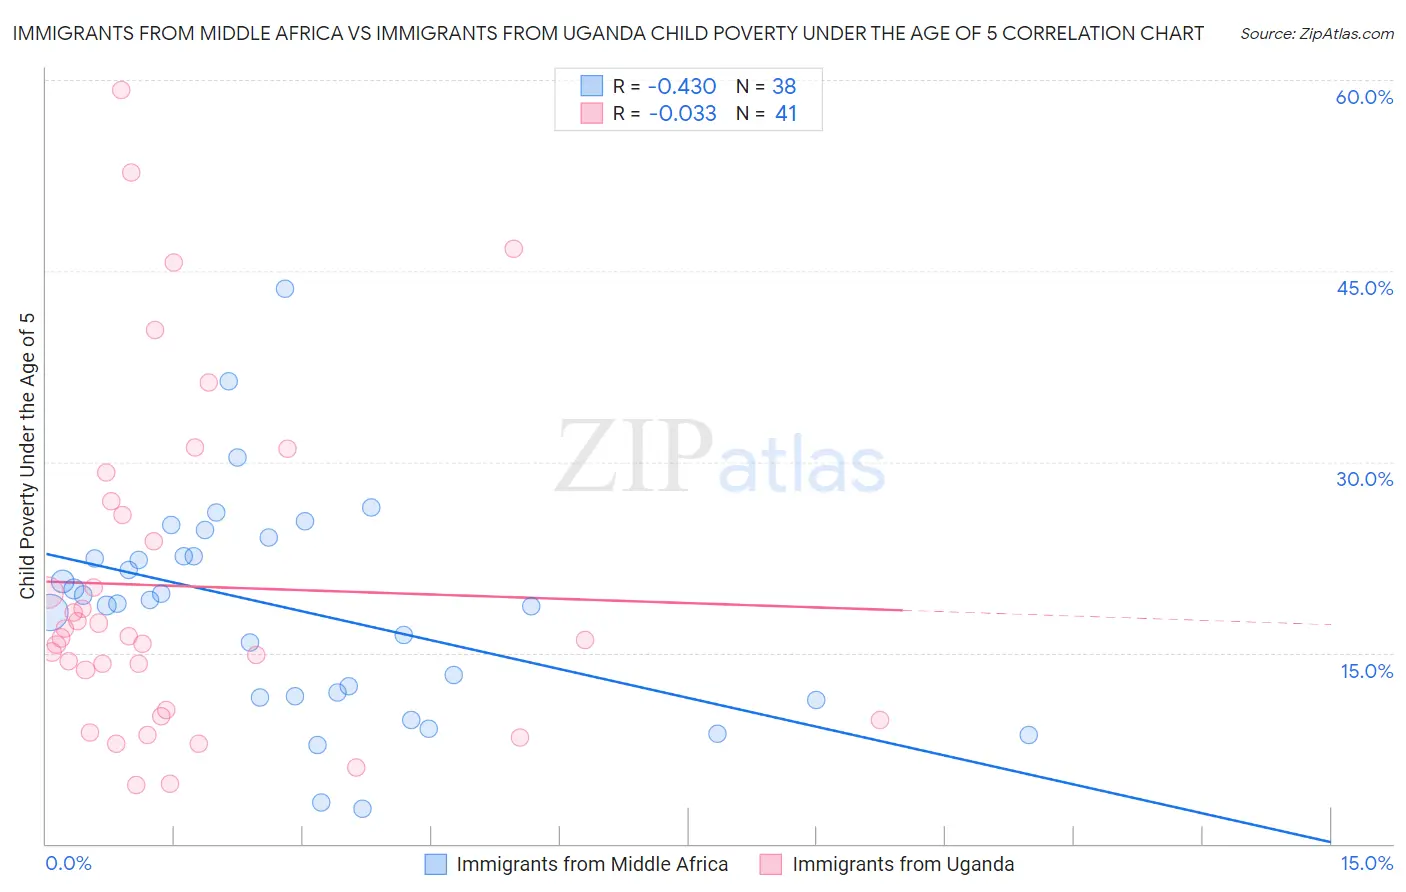 Immigrants from Middle Africa vs Immigrants from Uganda Child Poverty Under the Age of 5